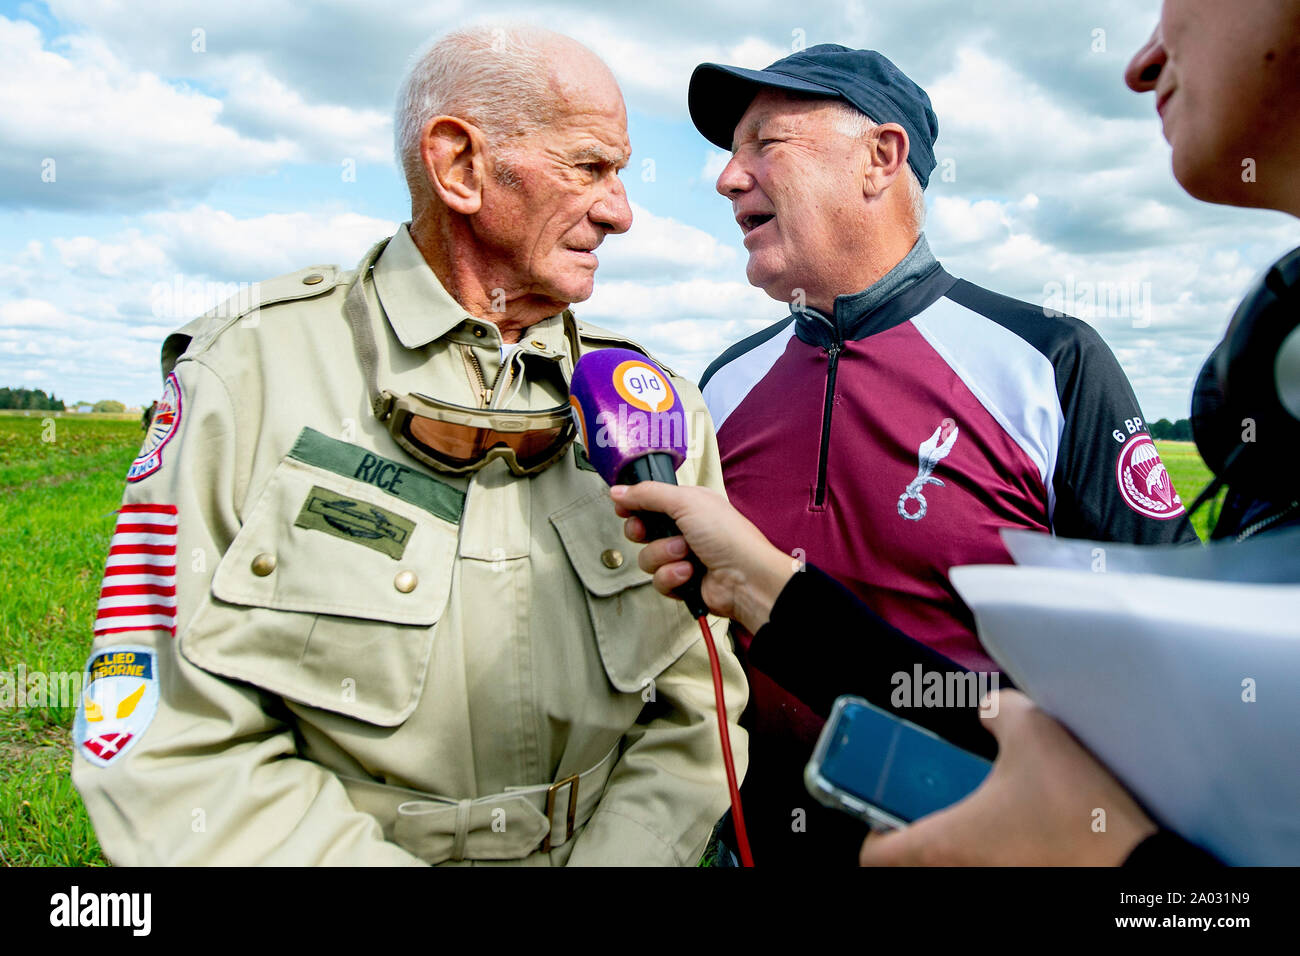 GROESBEEK 19-09-2019, dutchnews, parachute jump of mayor of Arnhem Ahmed Marcouch, US ambassador Pete Hoekstra and 89-old veteran Thomas Rice of the 501st Airborne division as part of 75th Airborne remembrance Stock Photo